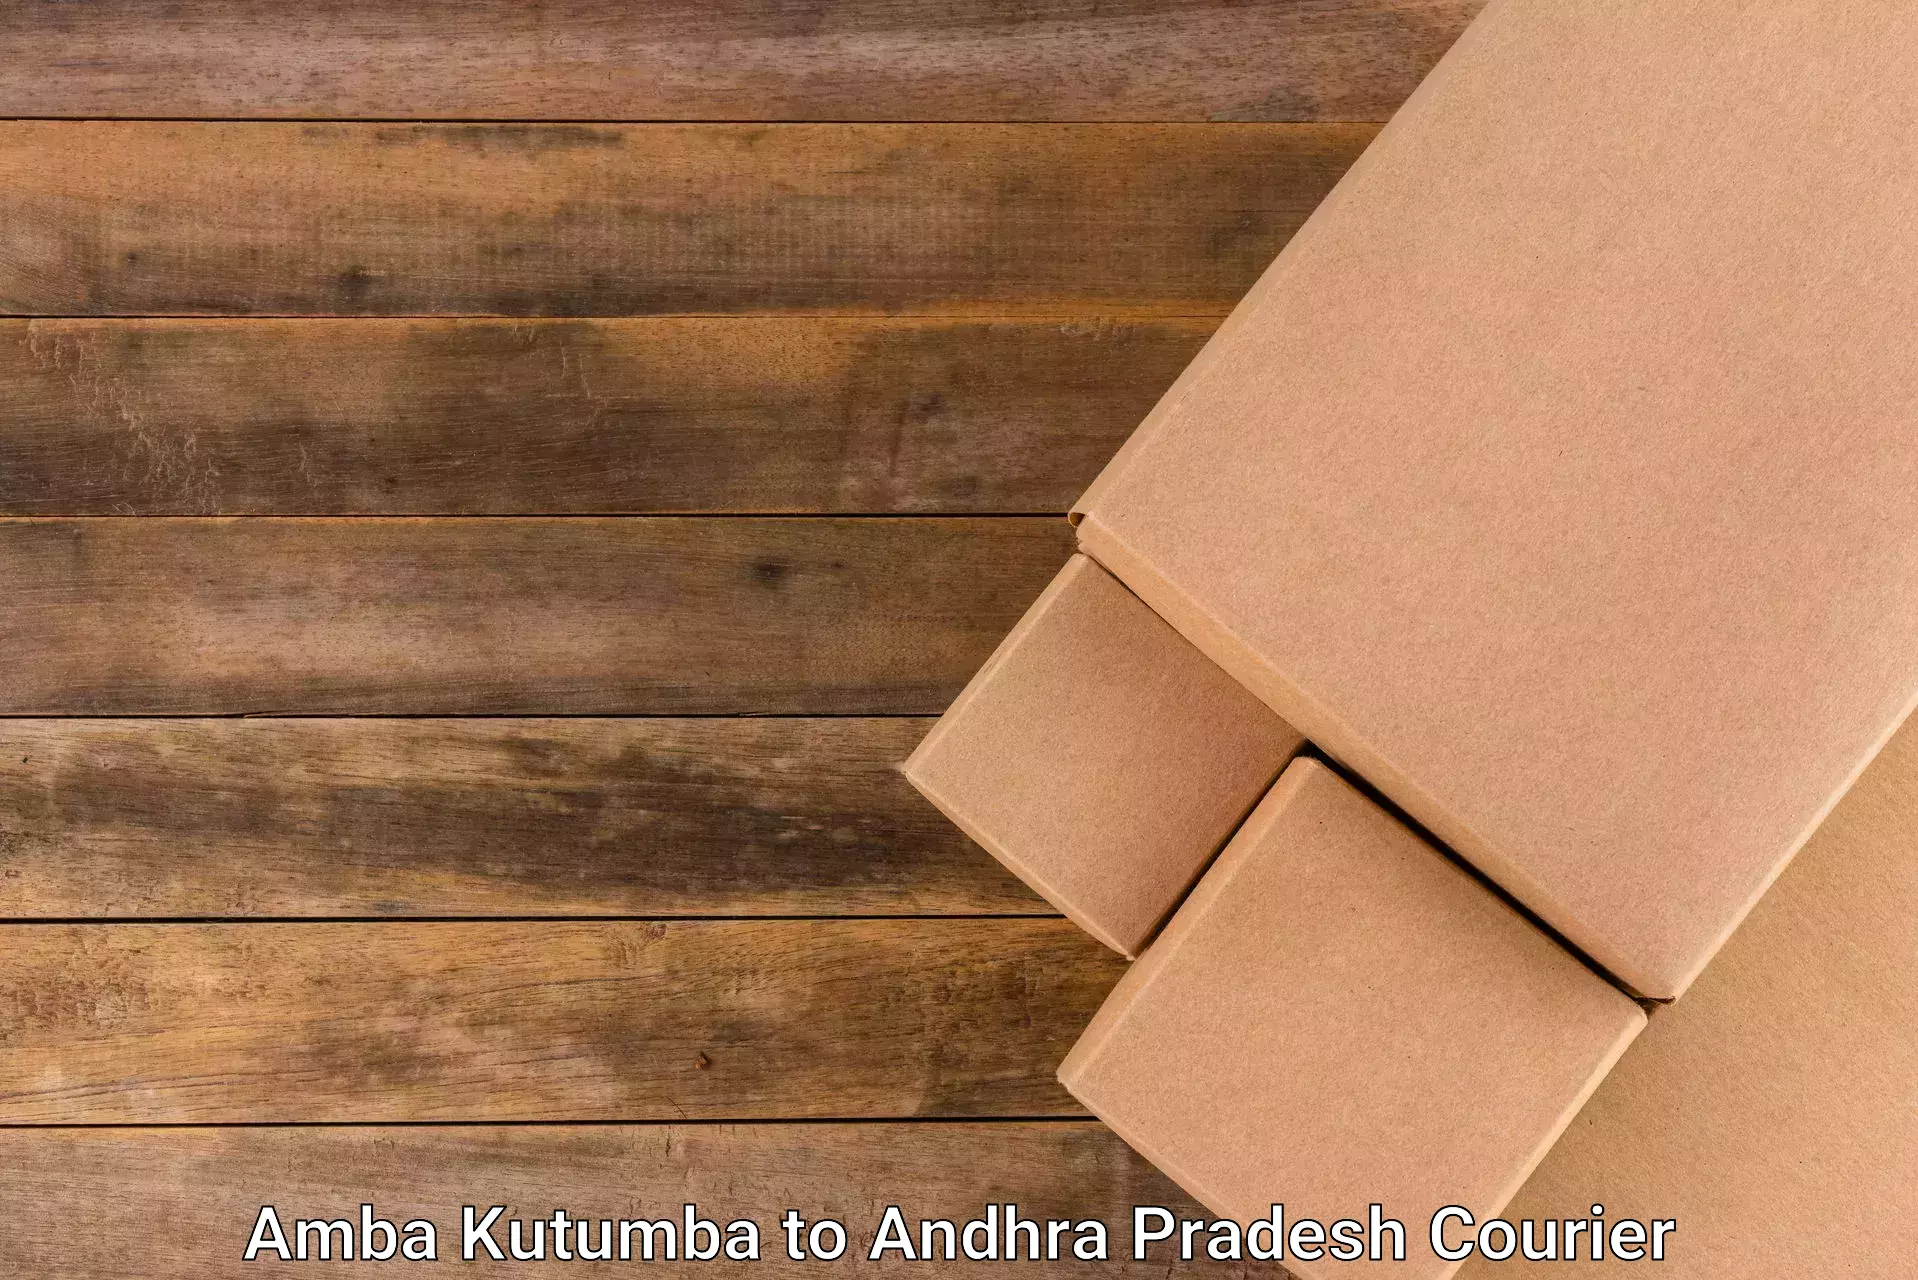 Business delivery service in Amba Kutumba to Andhra Pradesh